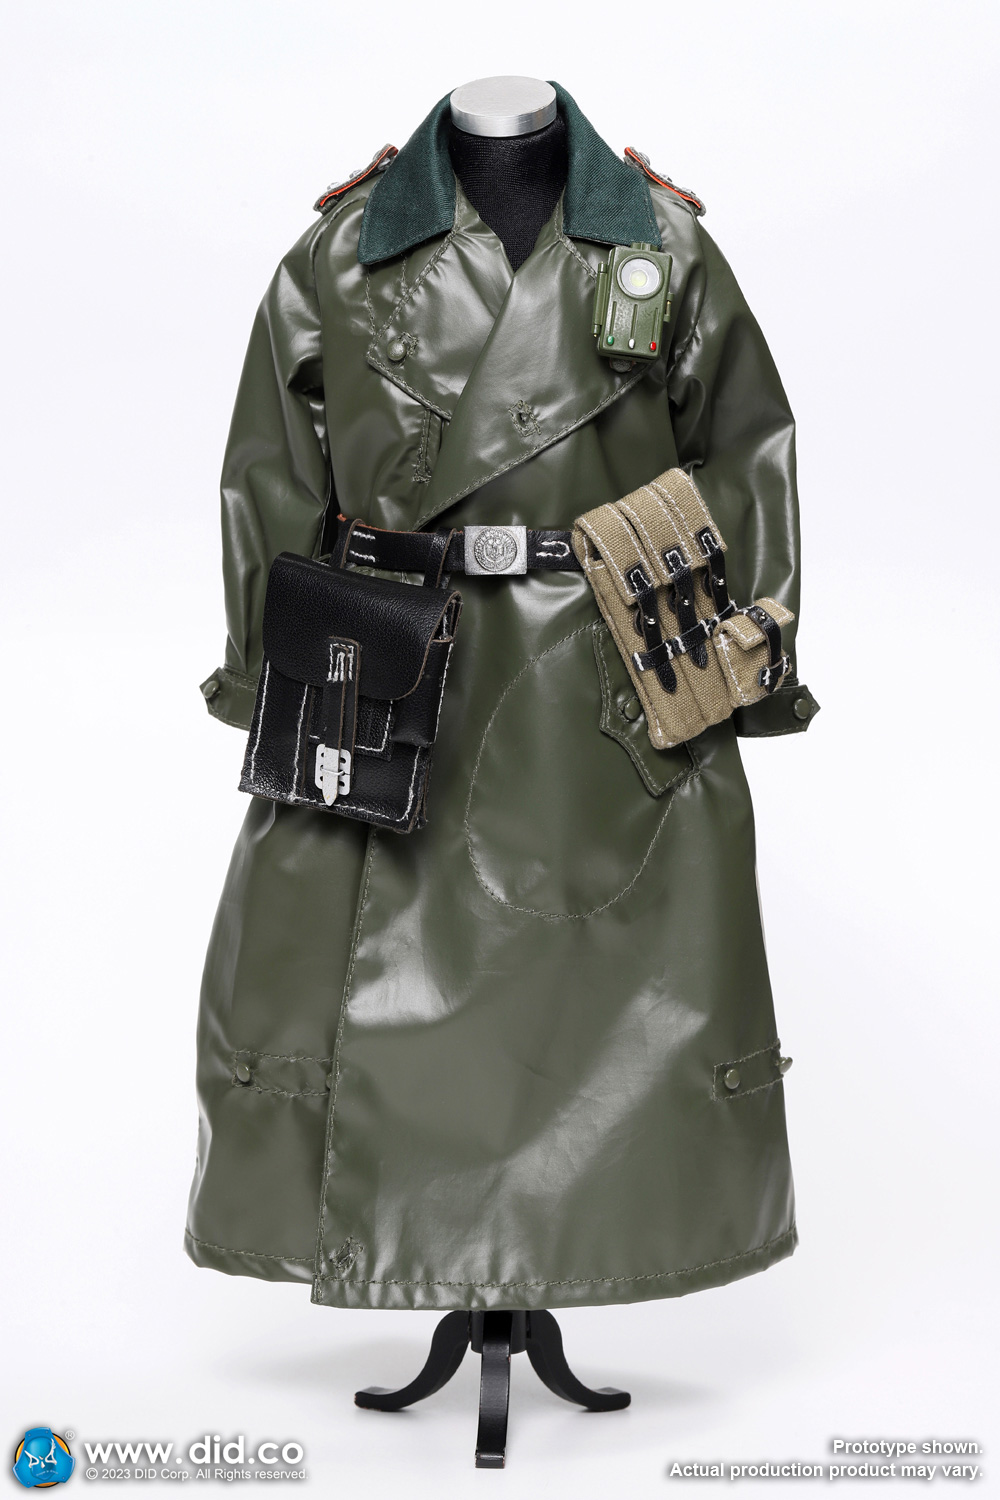 german - NEW PRODUCT: DiD: D80166 WWII German Military Policeman – Richard 1/6 scale action figure 4412